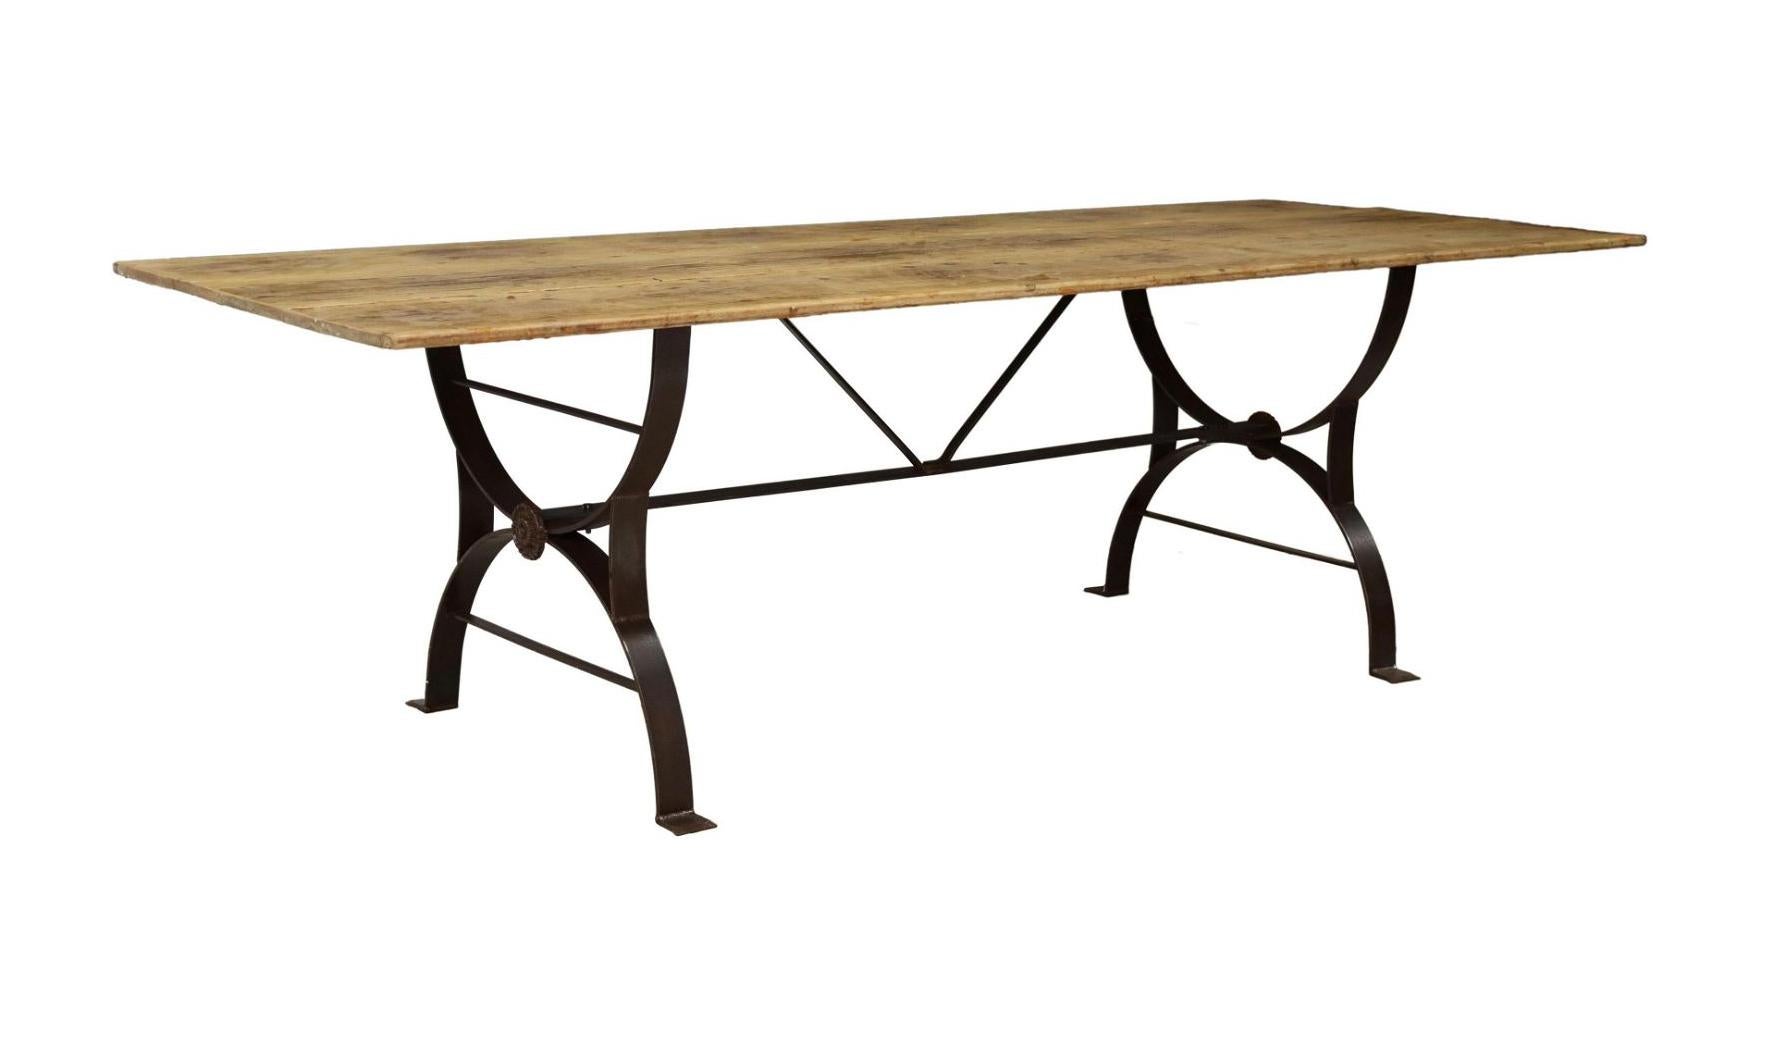 American Long Rustic Waxed Pine Cast Iron Base Table For Sale